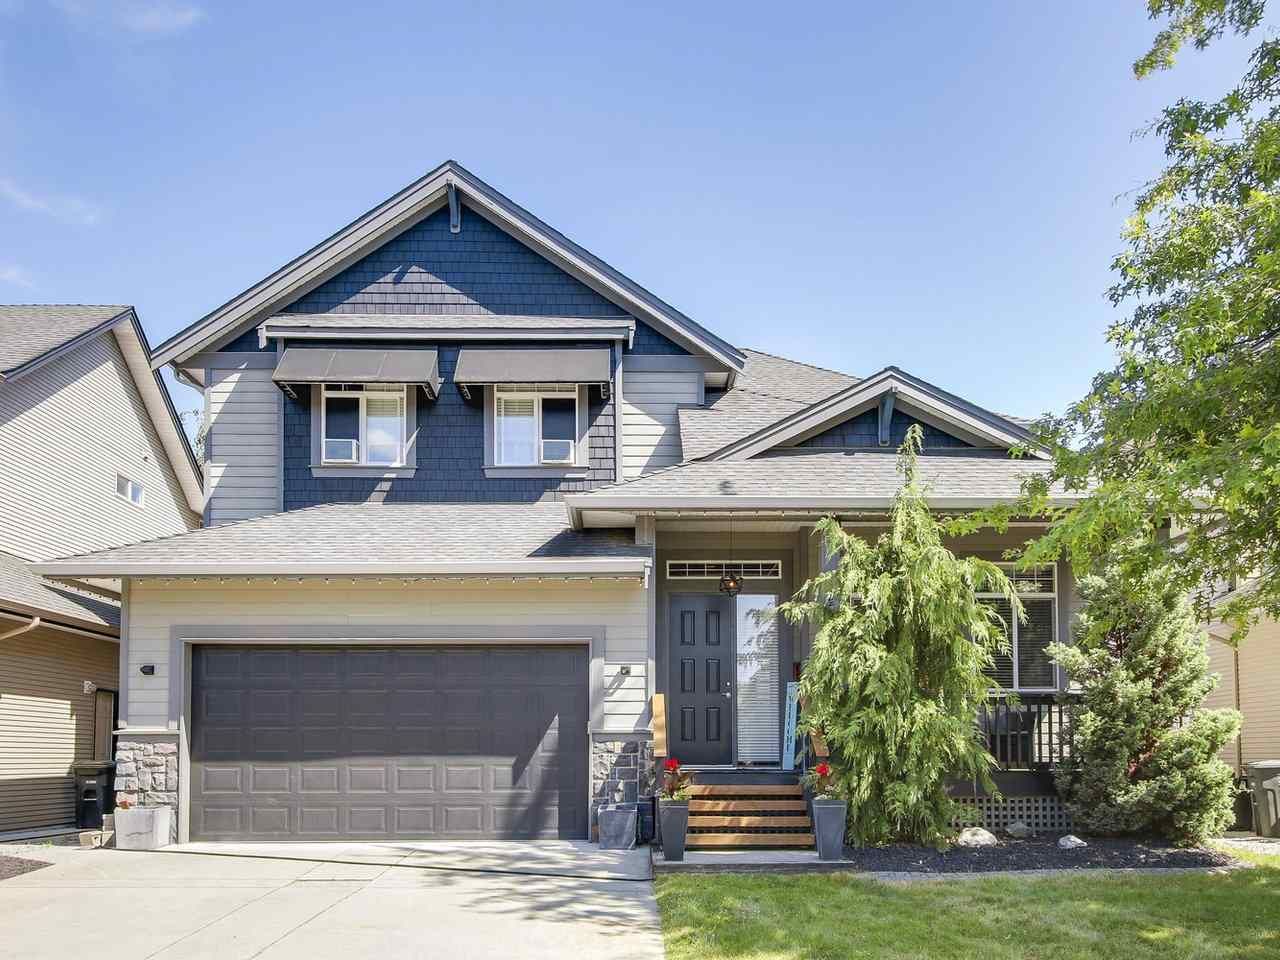 Main Photo: 11243 TULLY CRESCENT in : South Meadows House for sale : MLS®# R2204847